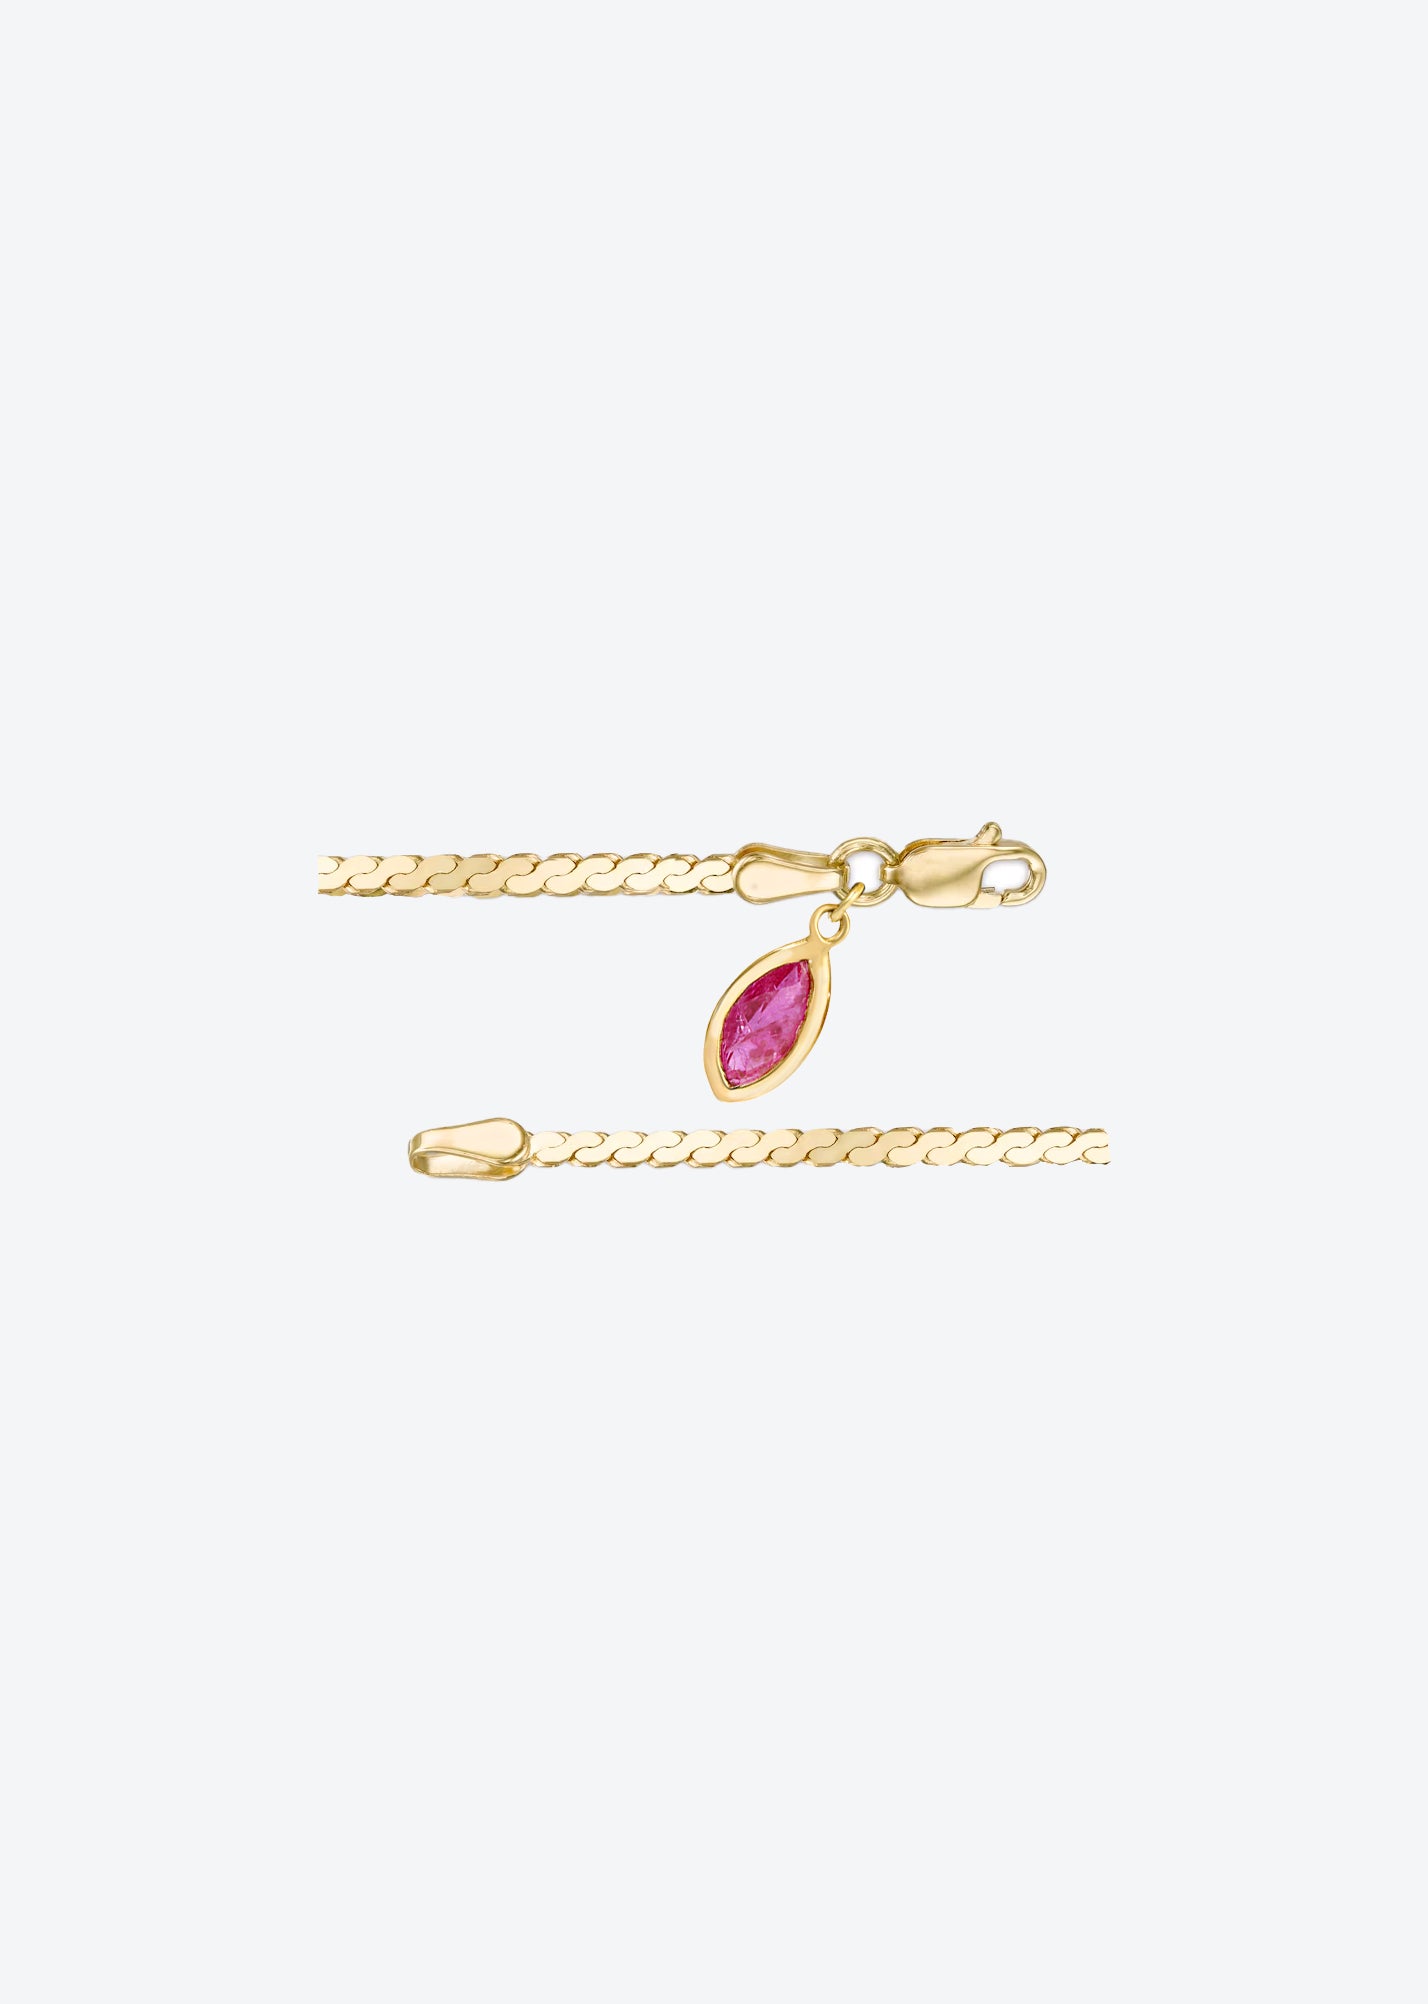 Serpentine Chain with Ruby Droplet